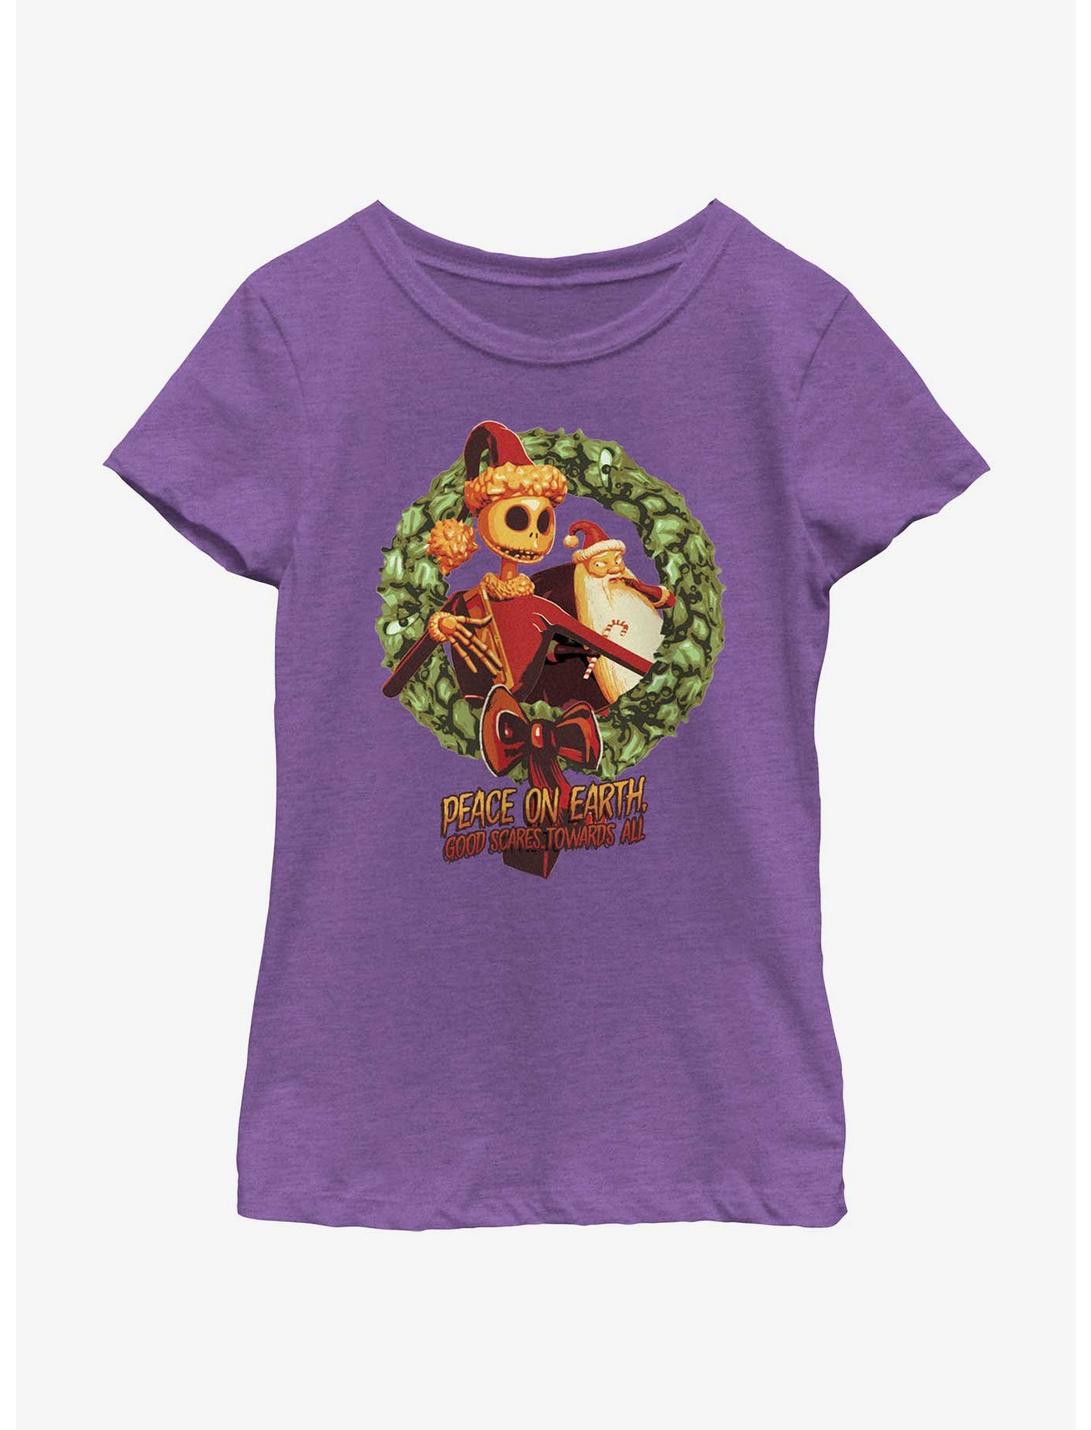 Disney Nightmare Before Christmas Peace On Earth Wreath Youth Girls T-Shirt, PURPLE BERRY, hi-res